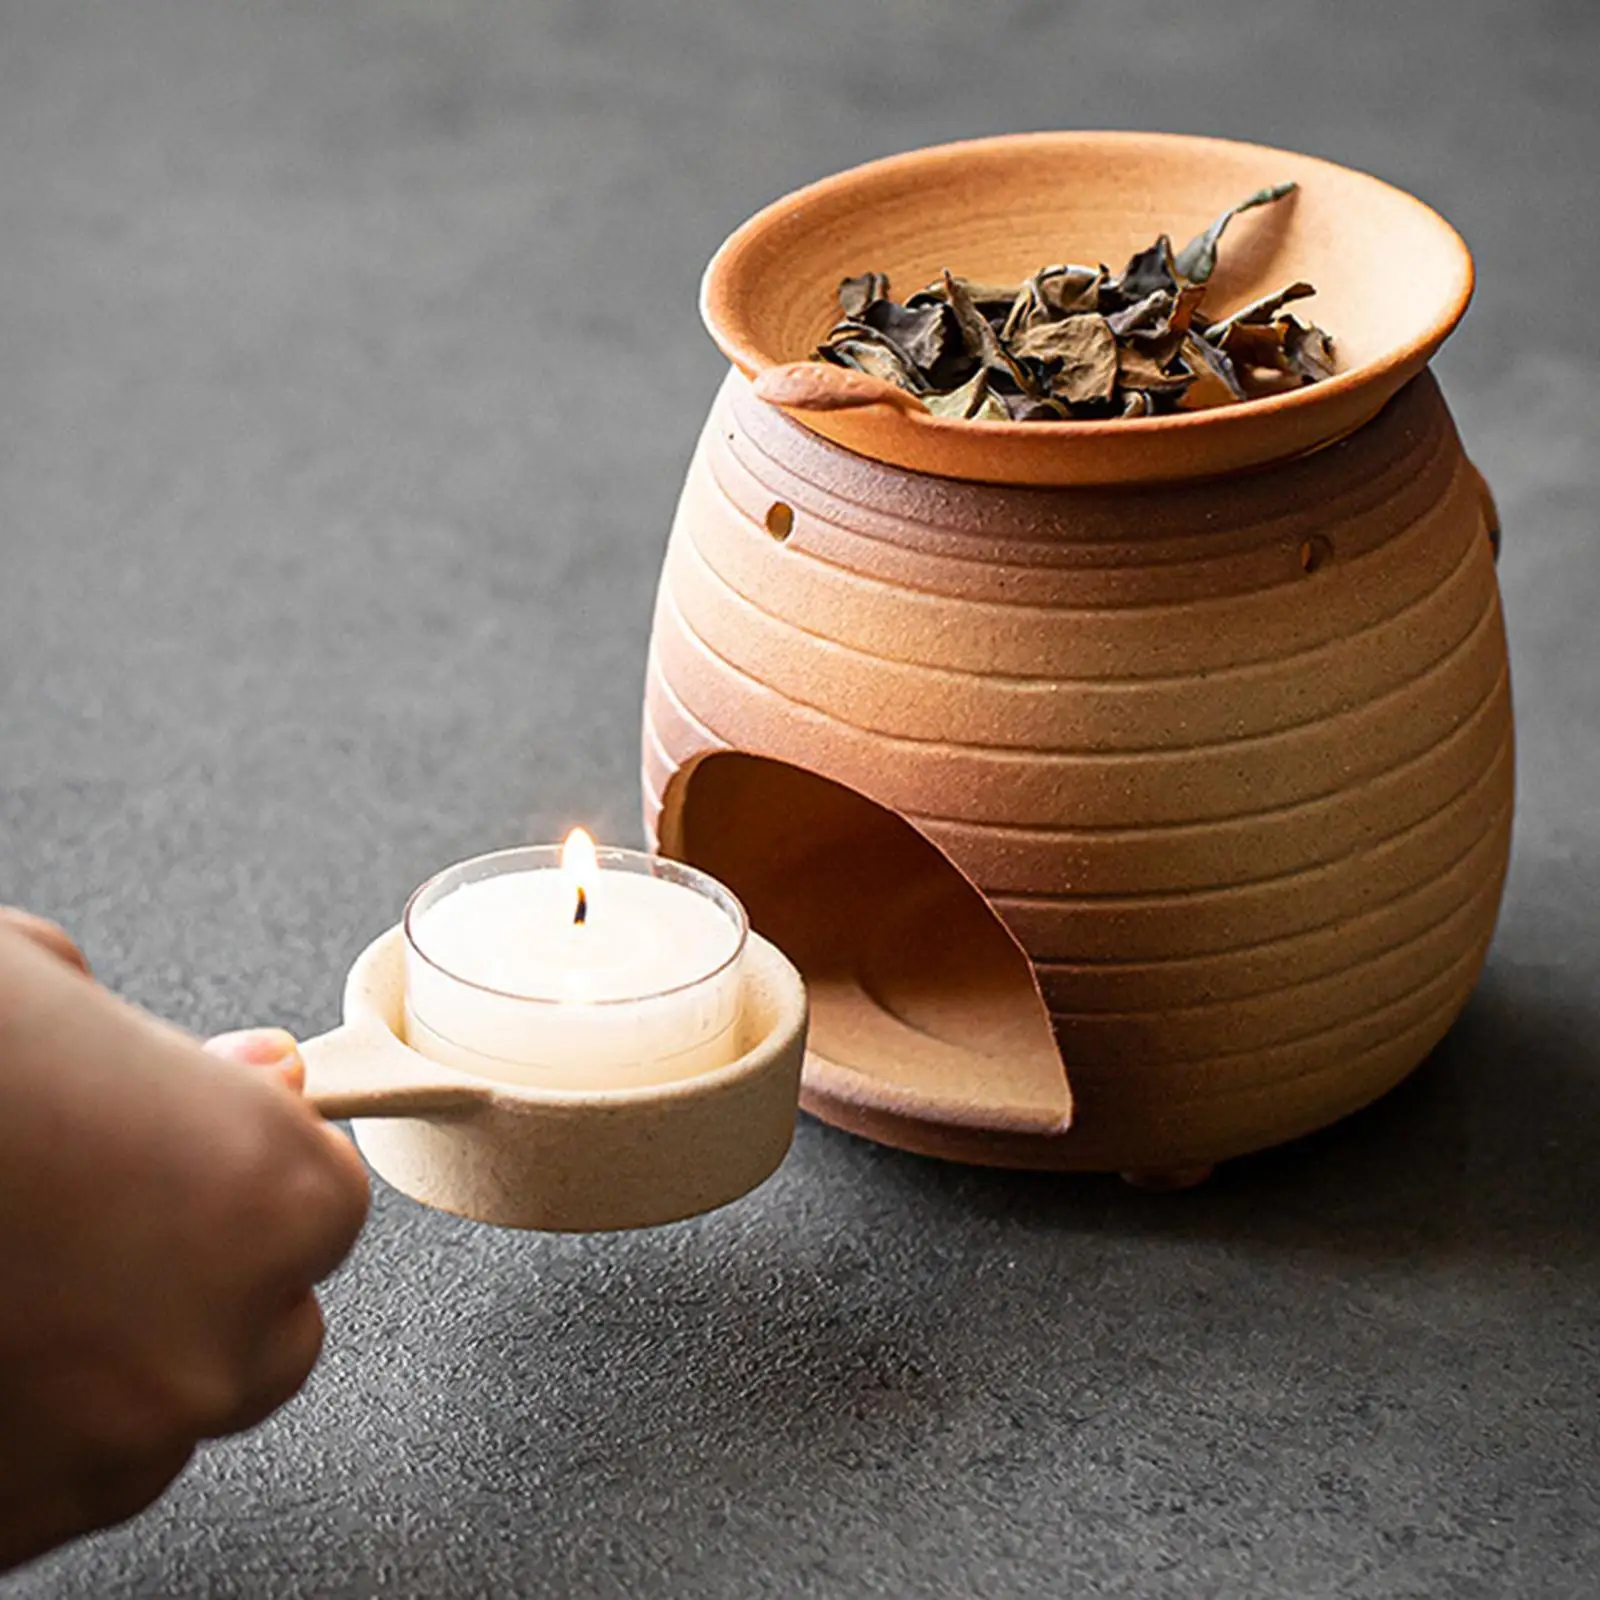 Round Ceramic Teapot Warmer Tealight Furnace with 8 Ghee Candles Roast All Kinds of Tea Candle Heating Base